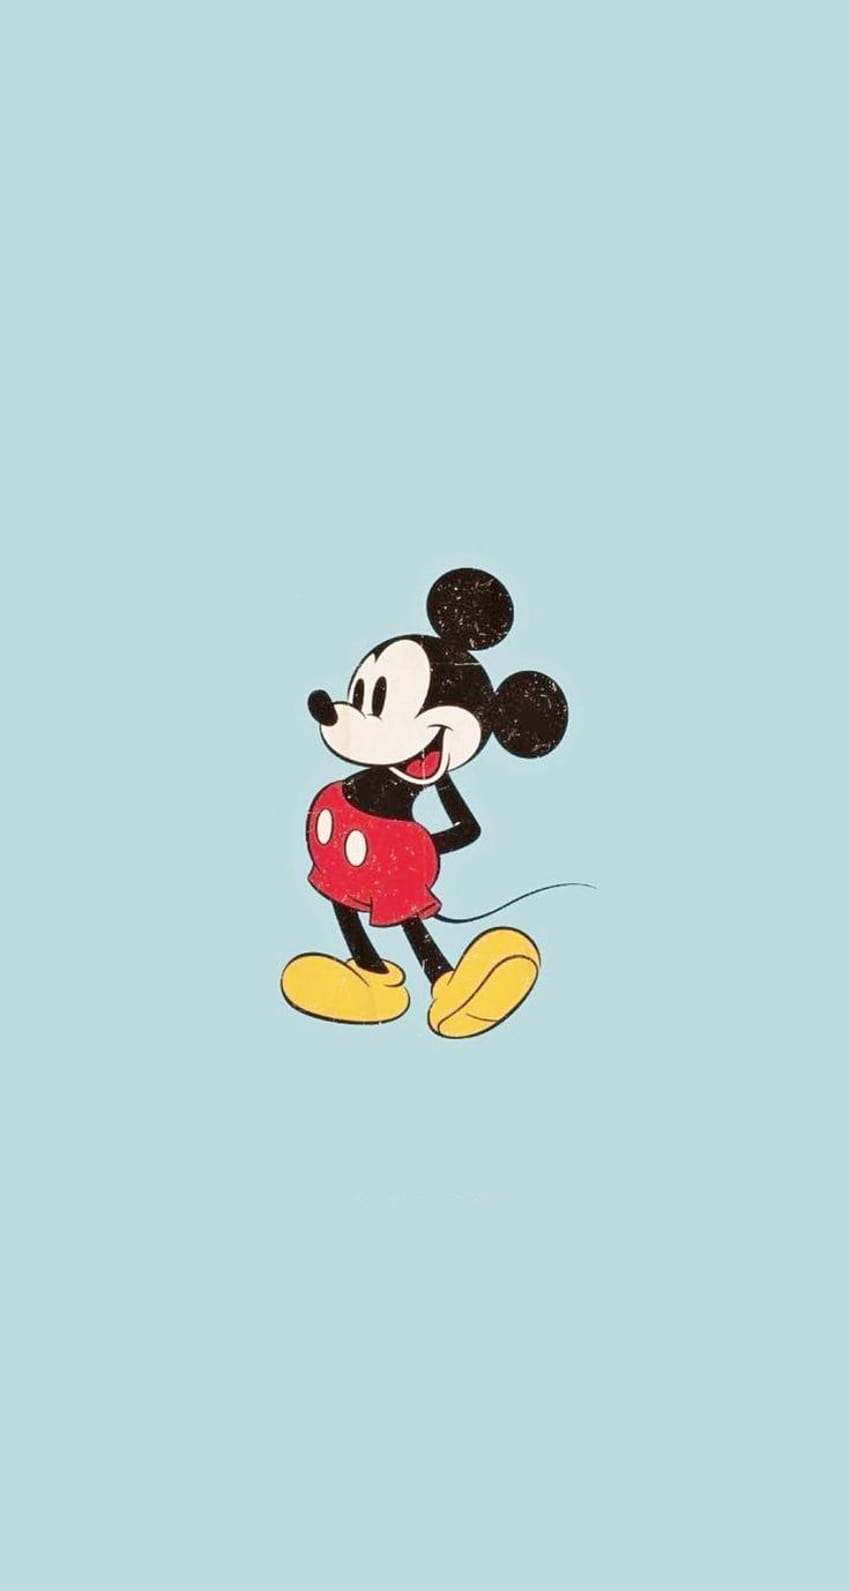 Download Cute Cartoon Character Mickey Mouse Wallpaper | Wallpapers.com